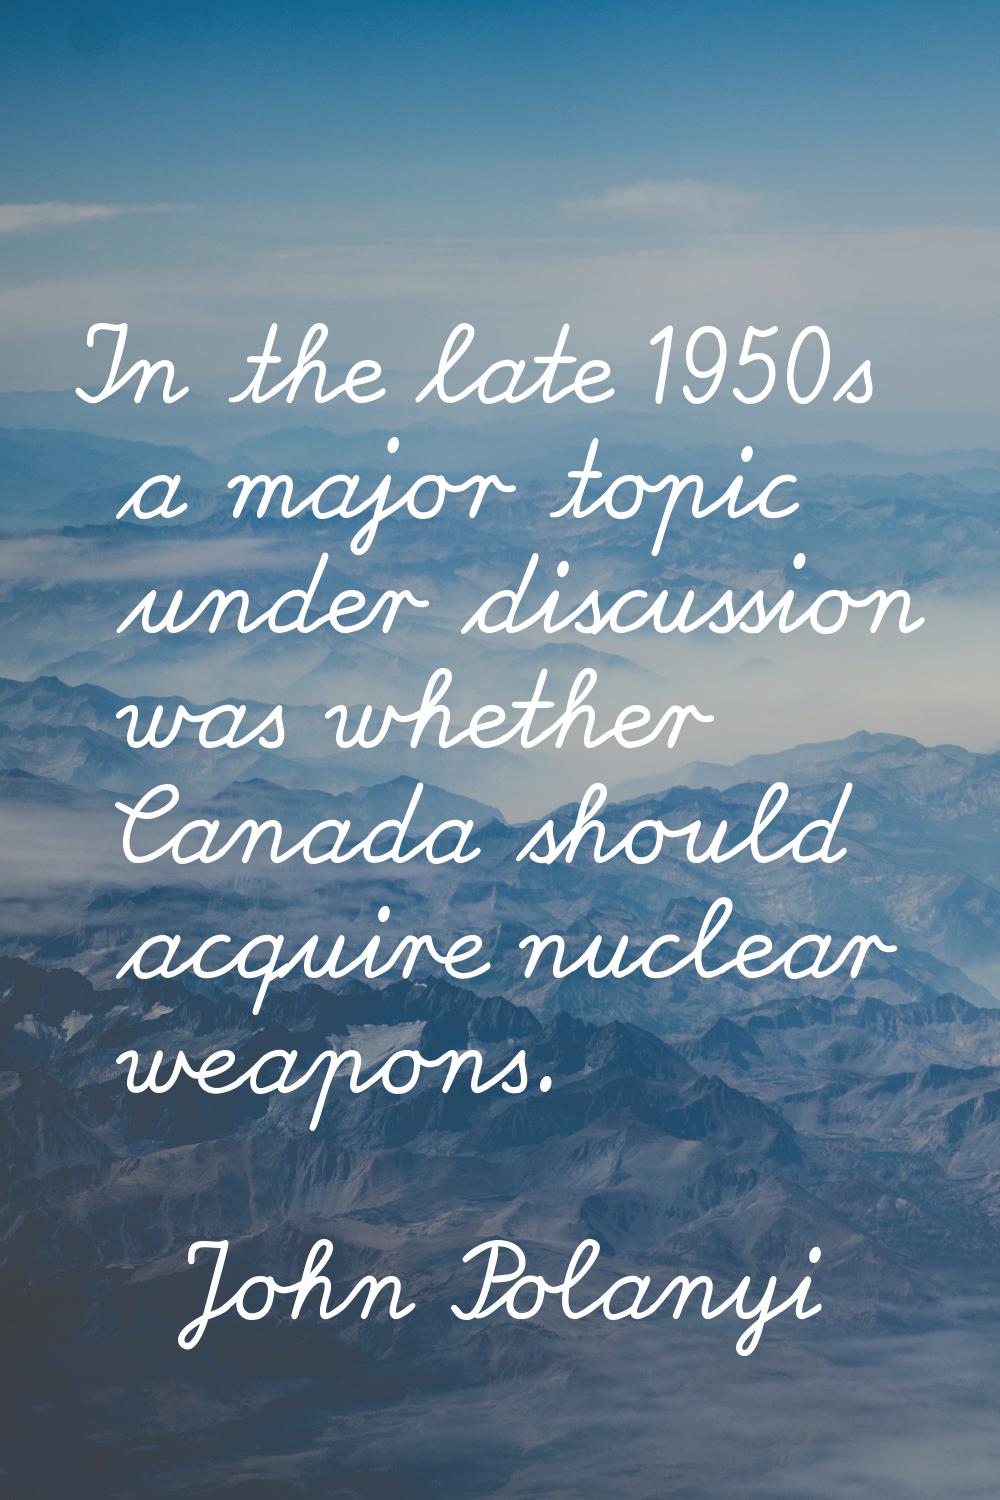 In the late 1950s a major topic under discussion was whether Canada should acquire nuclear weapons.